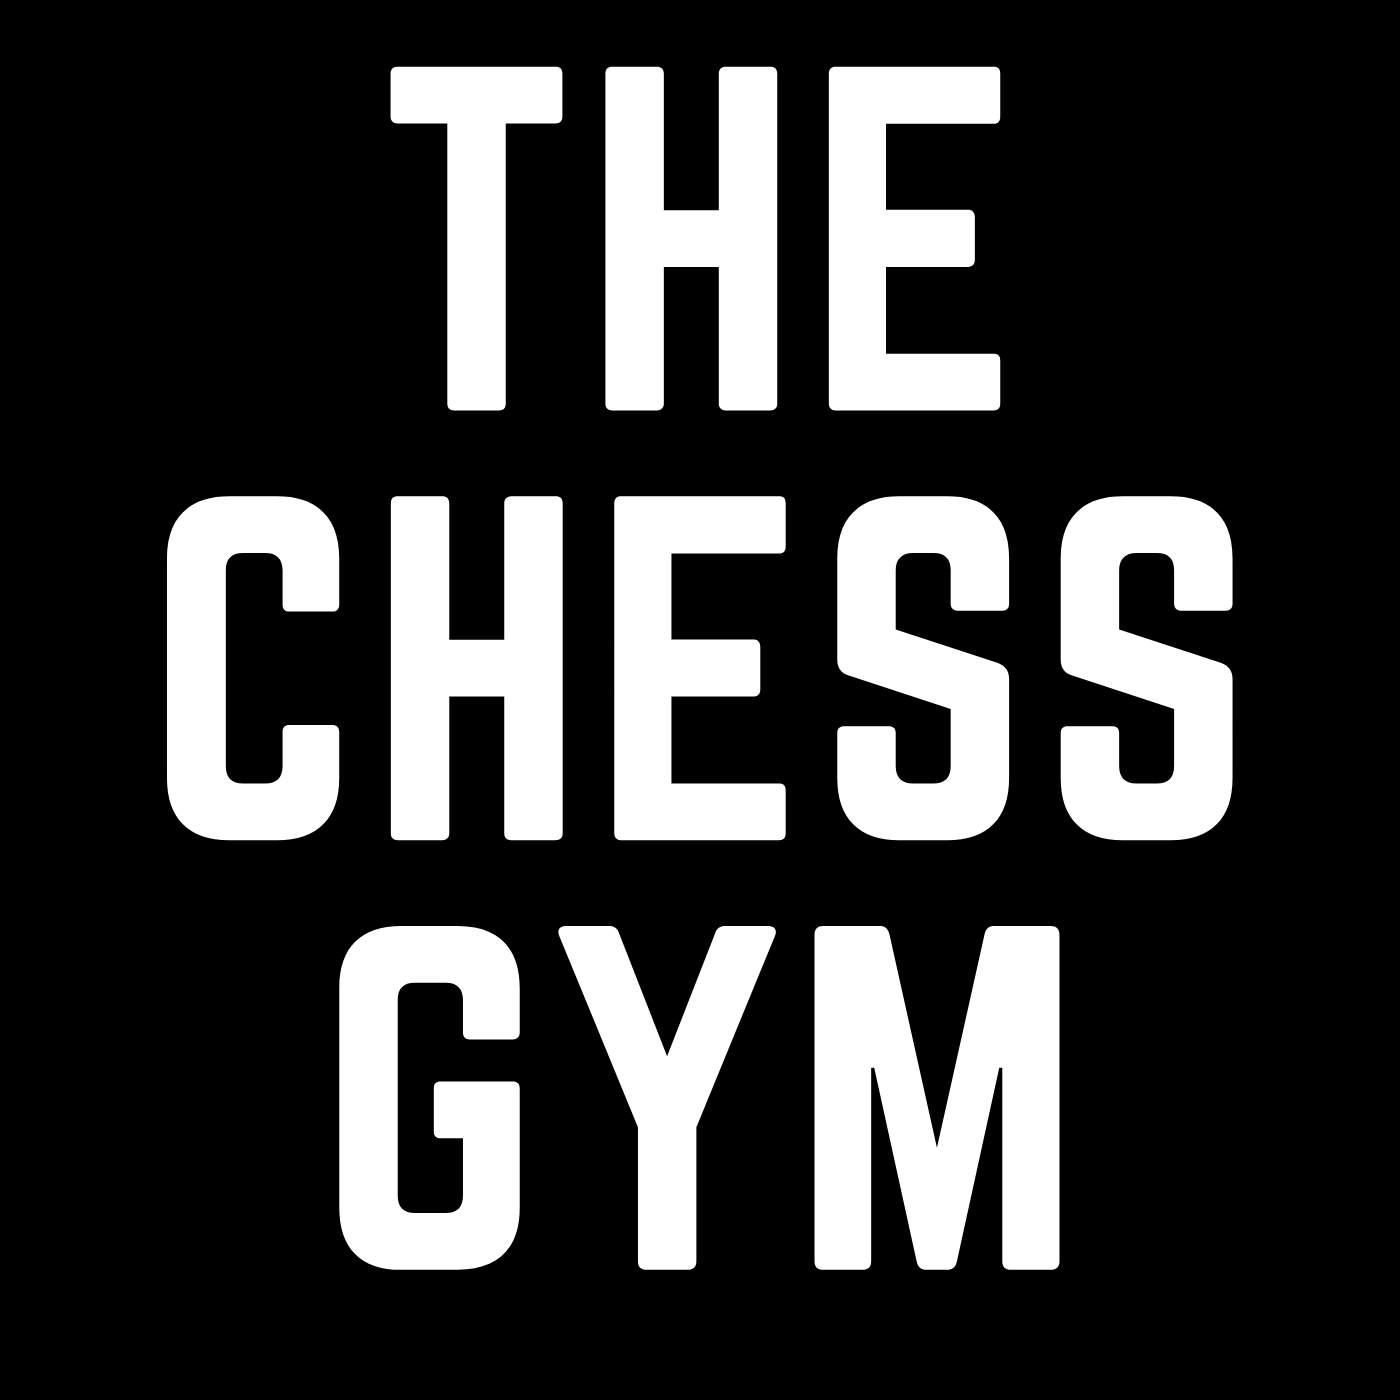 Artwork for The Chess Gym